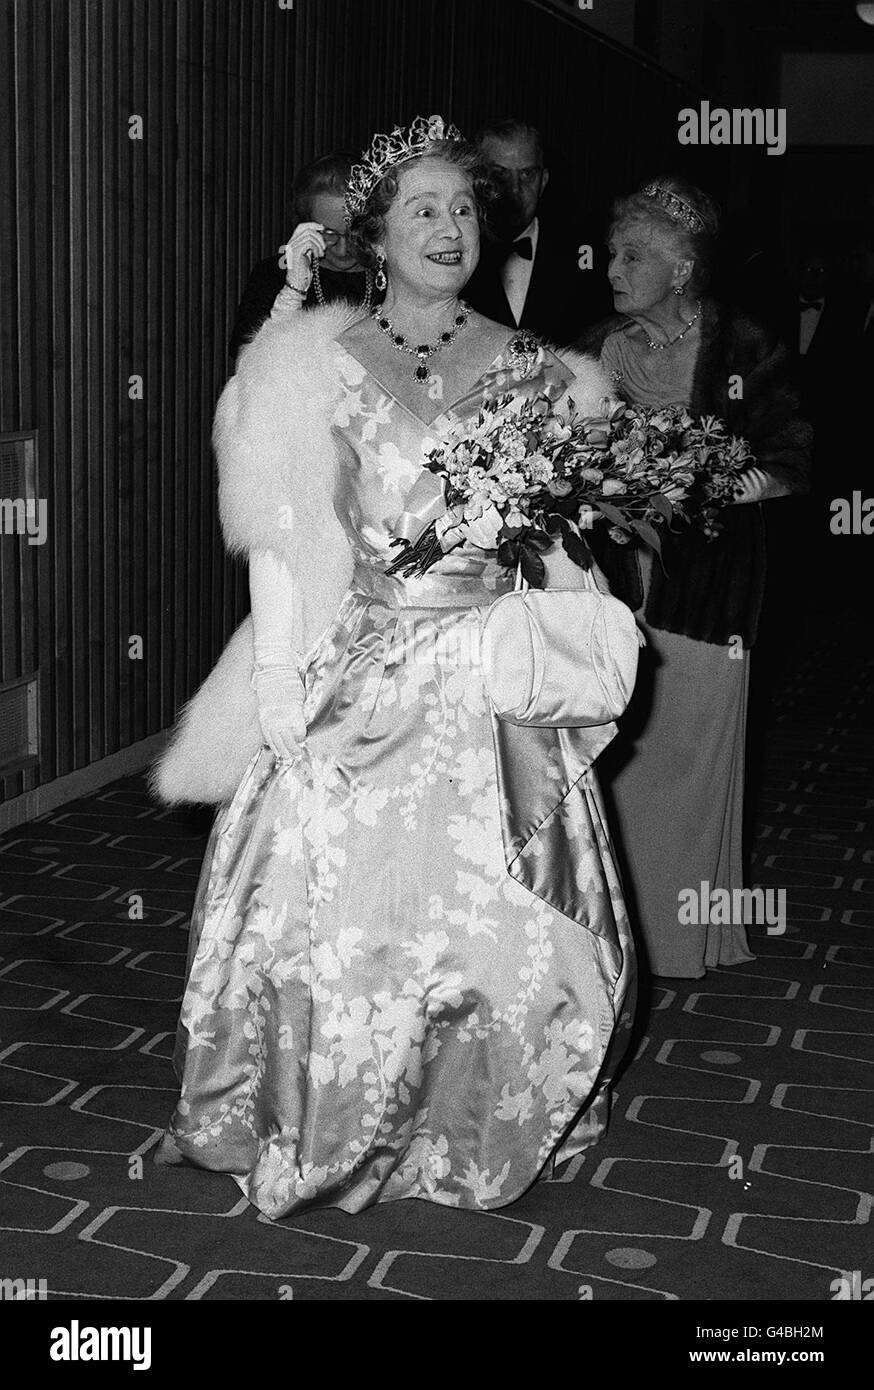 PA NEWS PHOTO 25/10/65 THE QUEEN MOTHER WITH PRINCESS ALICE (BEHIND) ATTEND THE ROYAL FESTIVAL HALL, LONDON GALA PERFORMANCE FOR THE VICTORIA LEAGUE COMMONWEALTH FRIENDSHIP Stock Photo